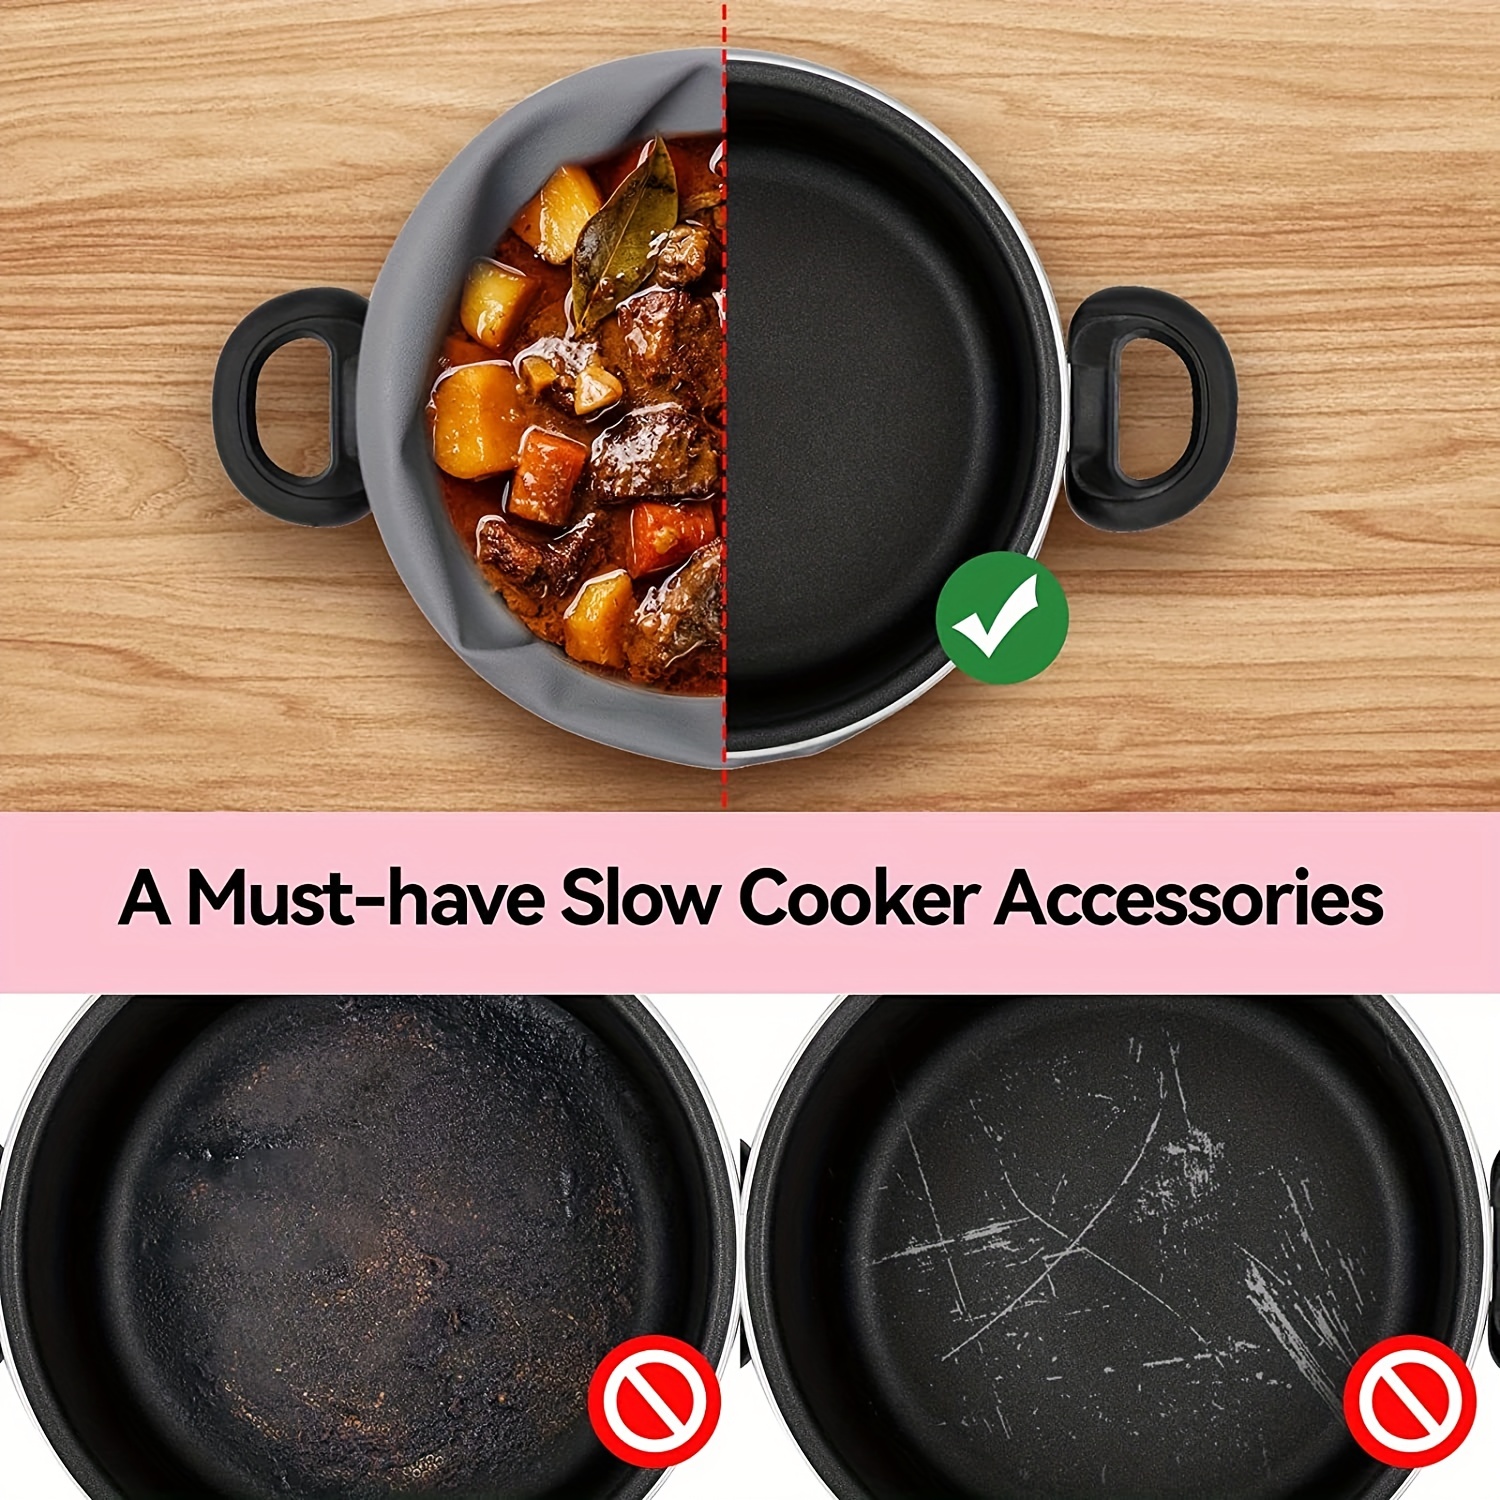 8 Slow Cooker Accessories That Are a Must Have - Slow Cooking